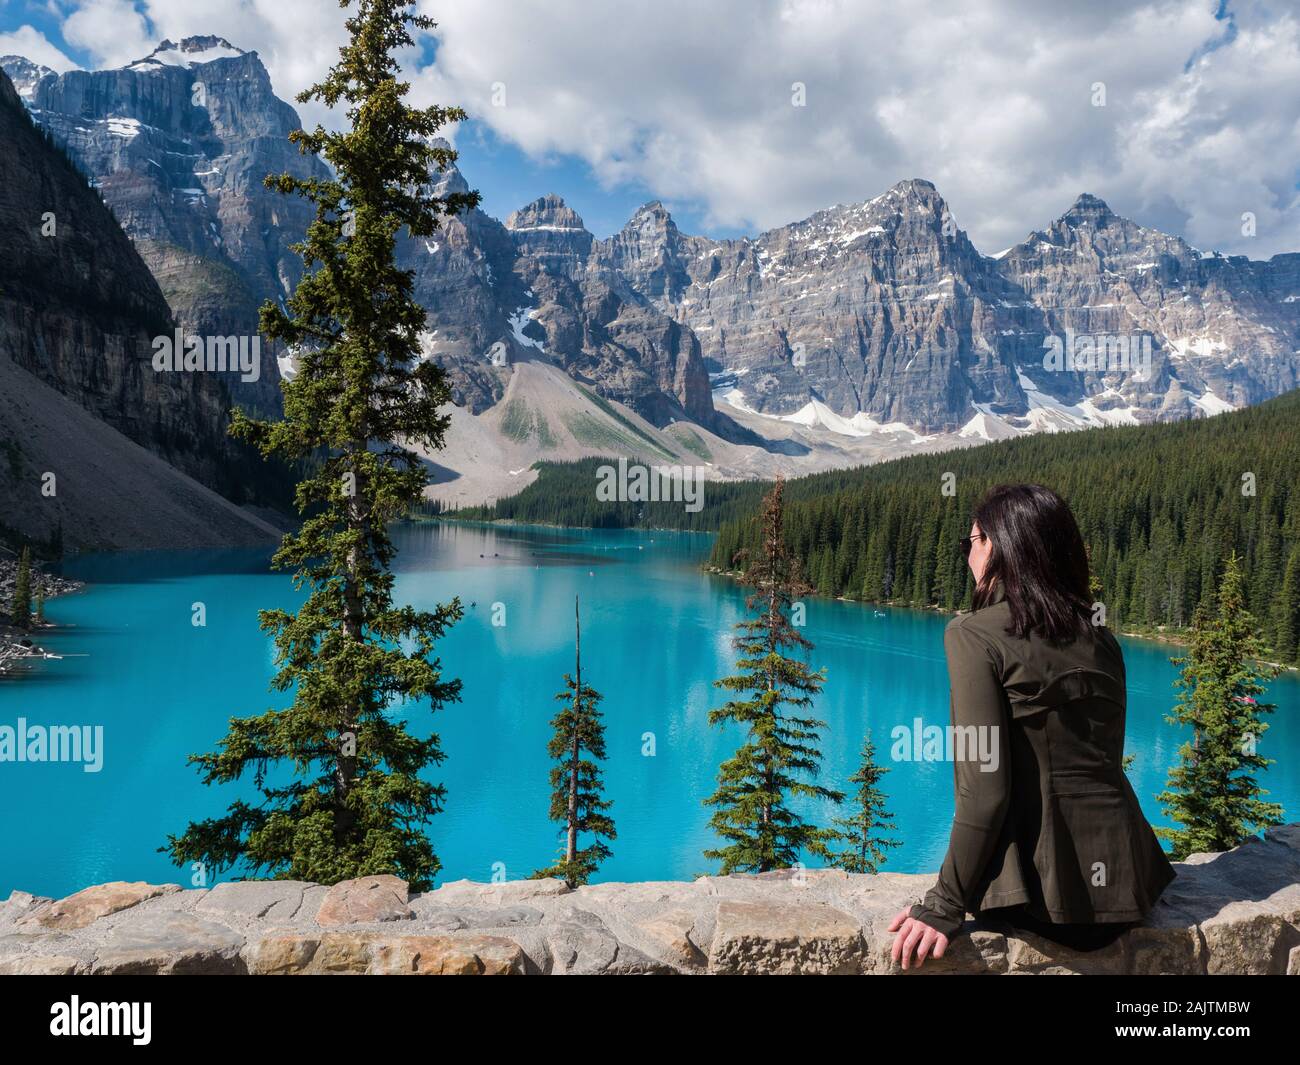 Female tourist looking at the view at Moraine Lake in Banff National Park, Canadian Rockies, Alberta, Canada. Stock Photo